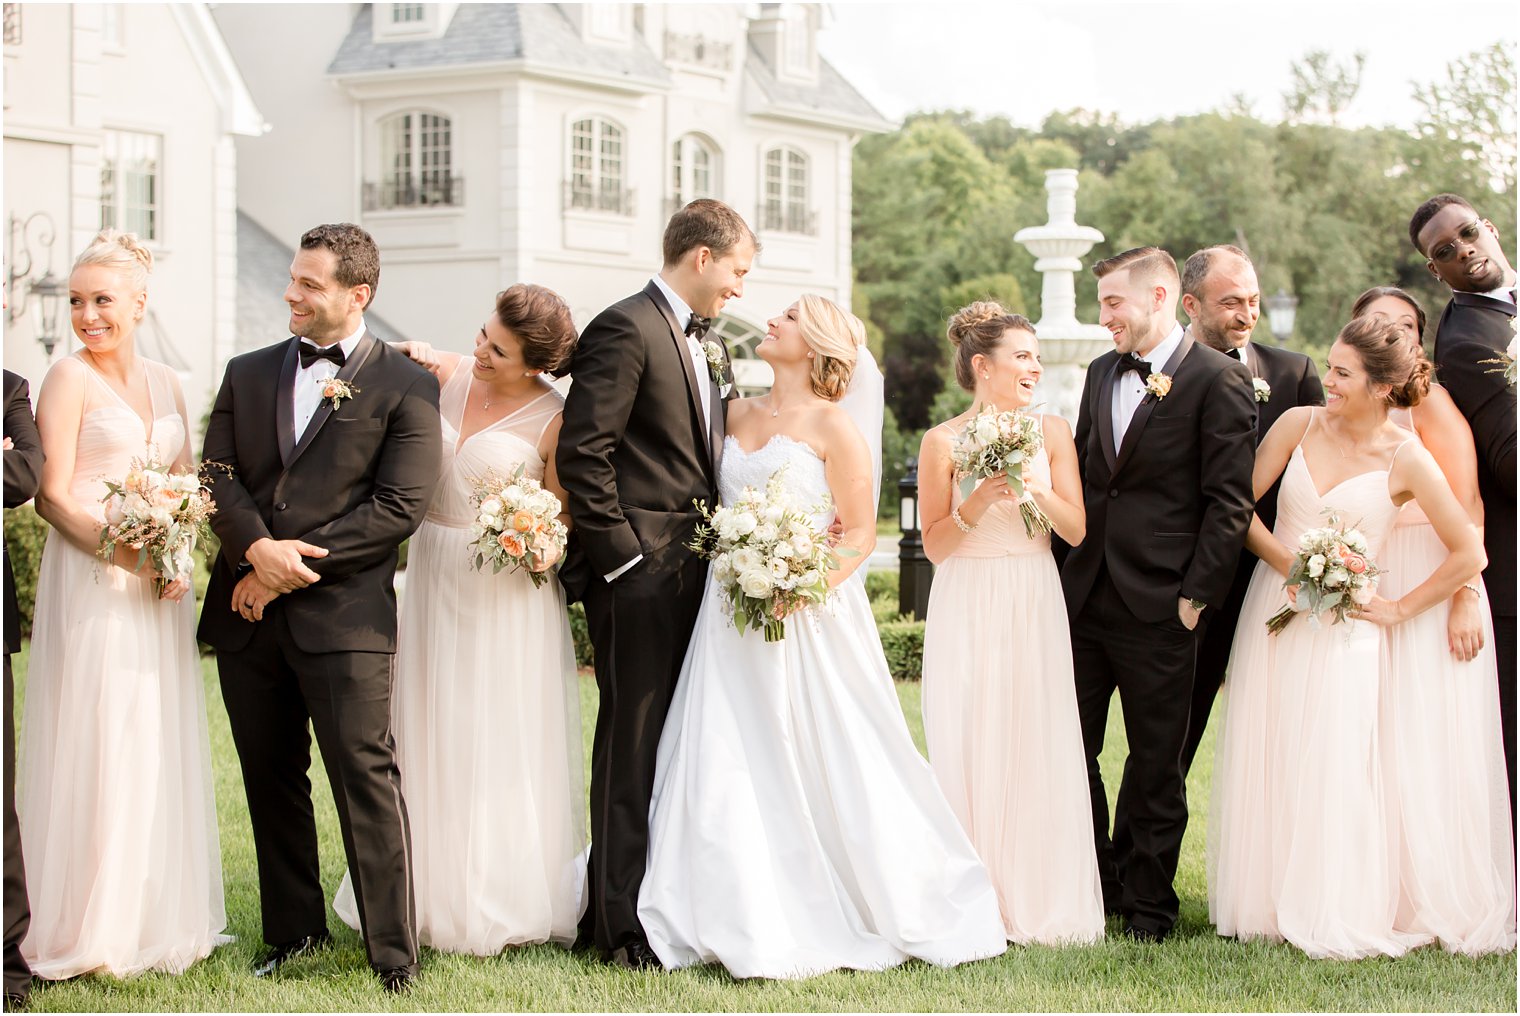 Bridal party photo in front of Park Chateau Estate